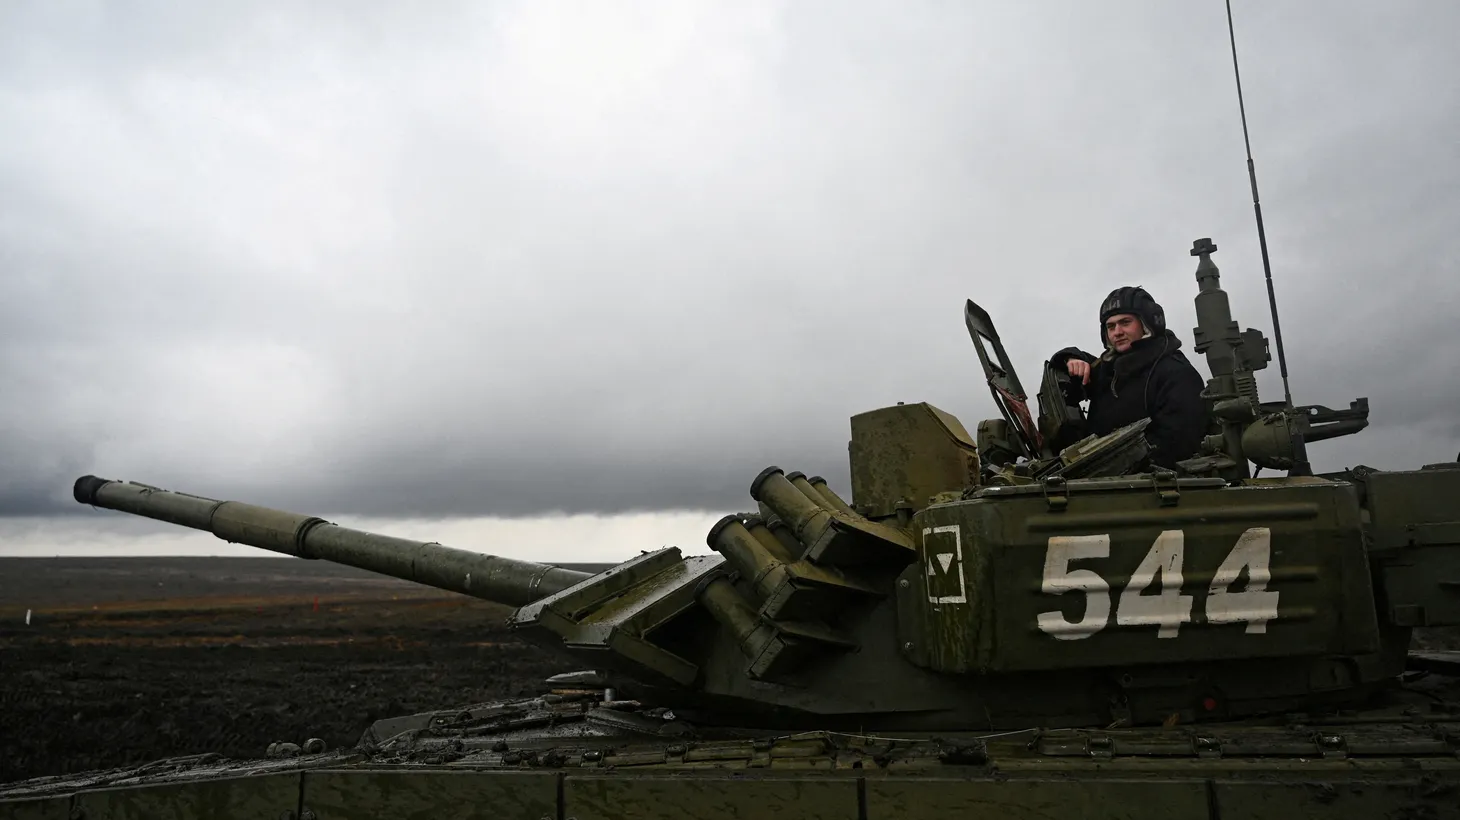 A Russian service member is seen atop a T-72B3 main battle tank during military drills at the Kadamovsky range in the Rostov region, Russia, December 20, 2021.